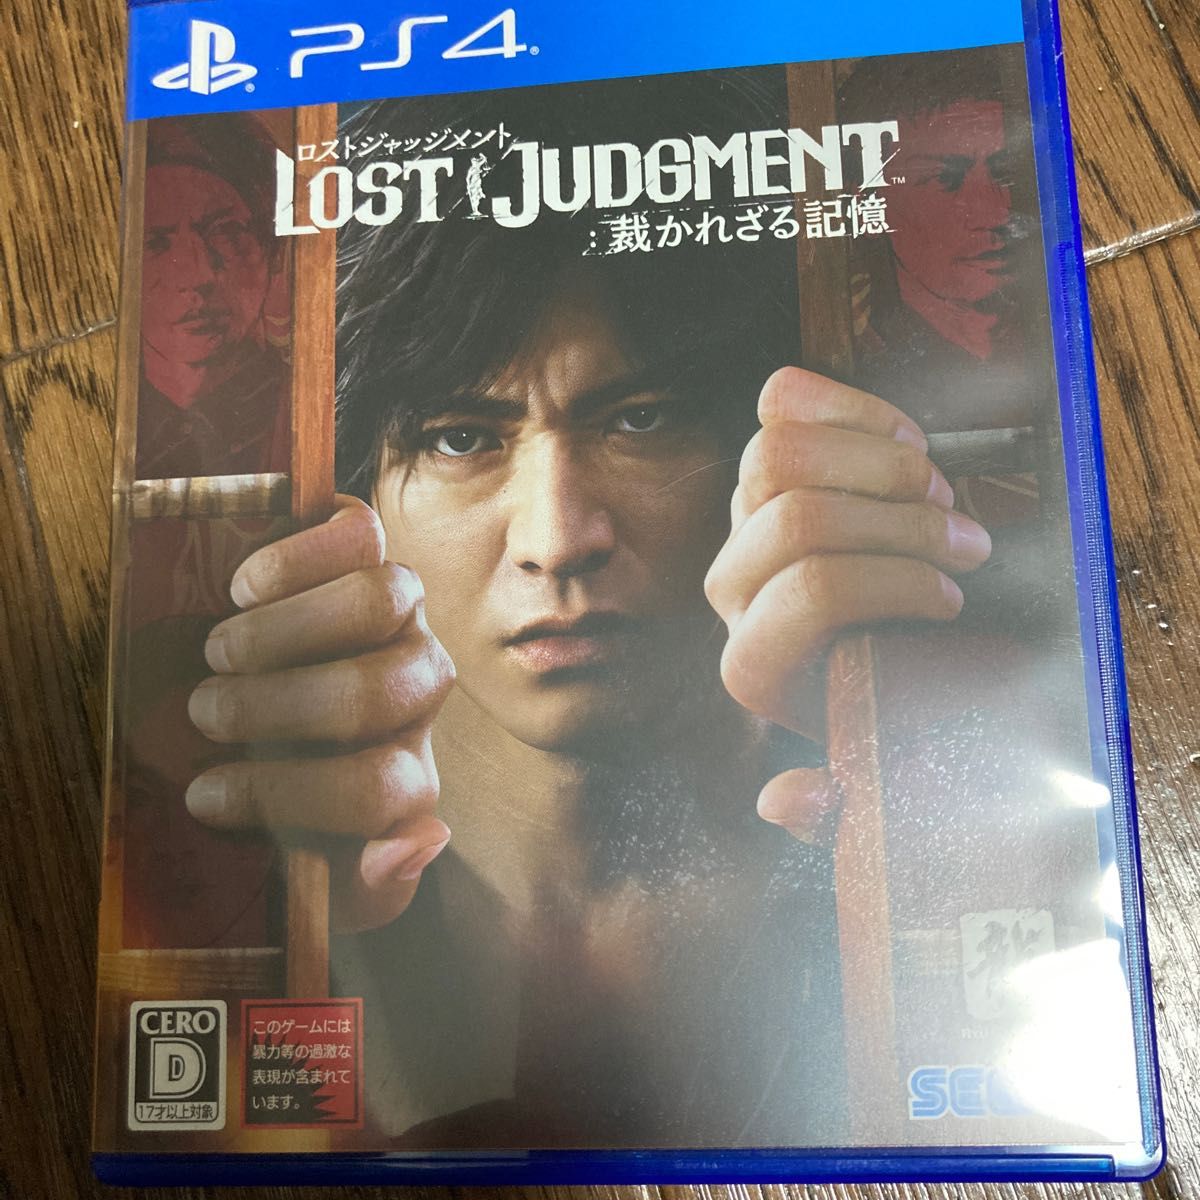 【PS4】 LOST JUDGMENT:裁かれざる記憶※20日まで限定値下げ※